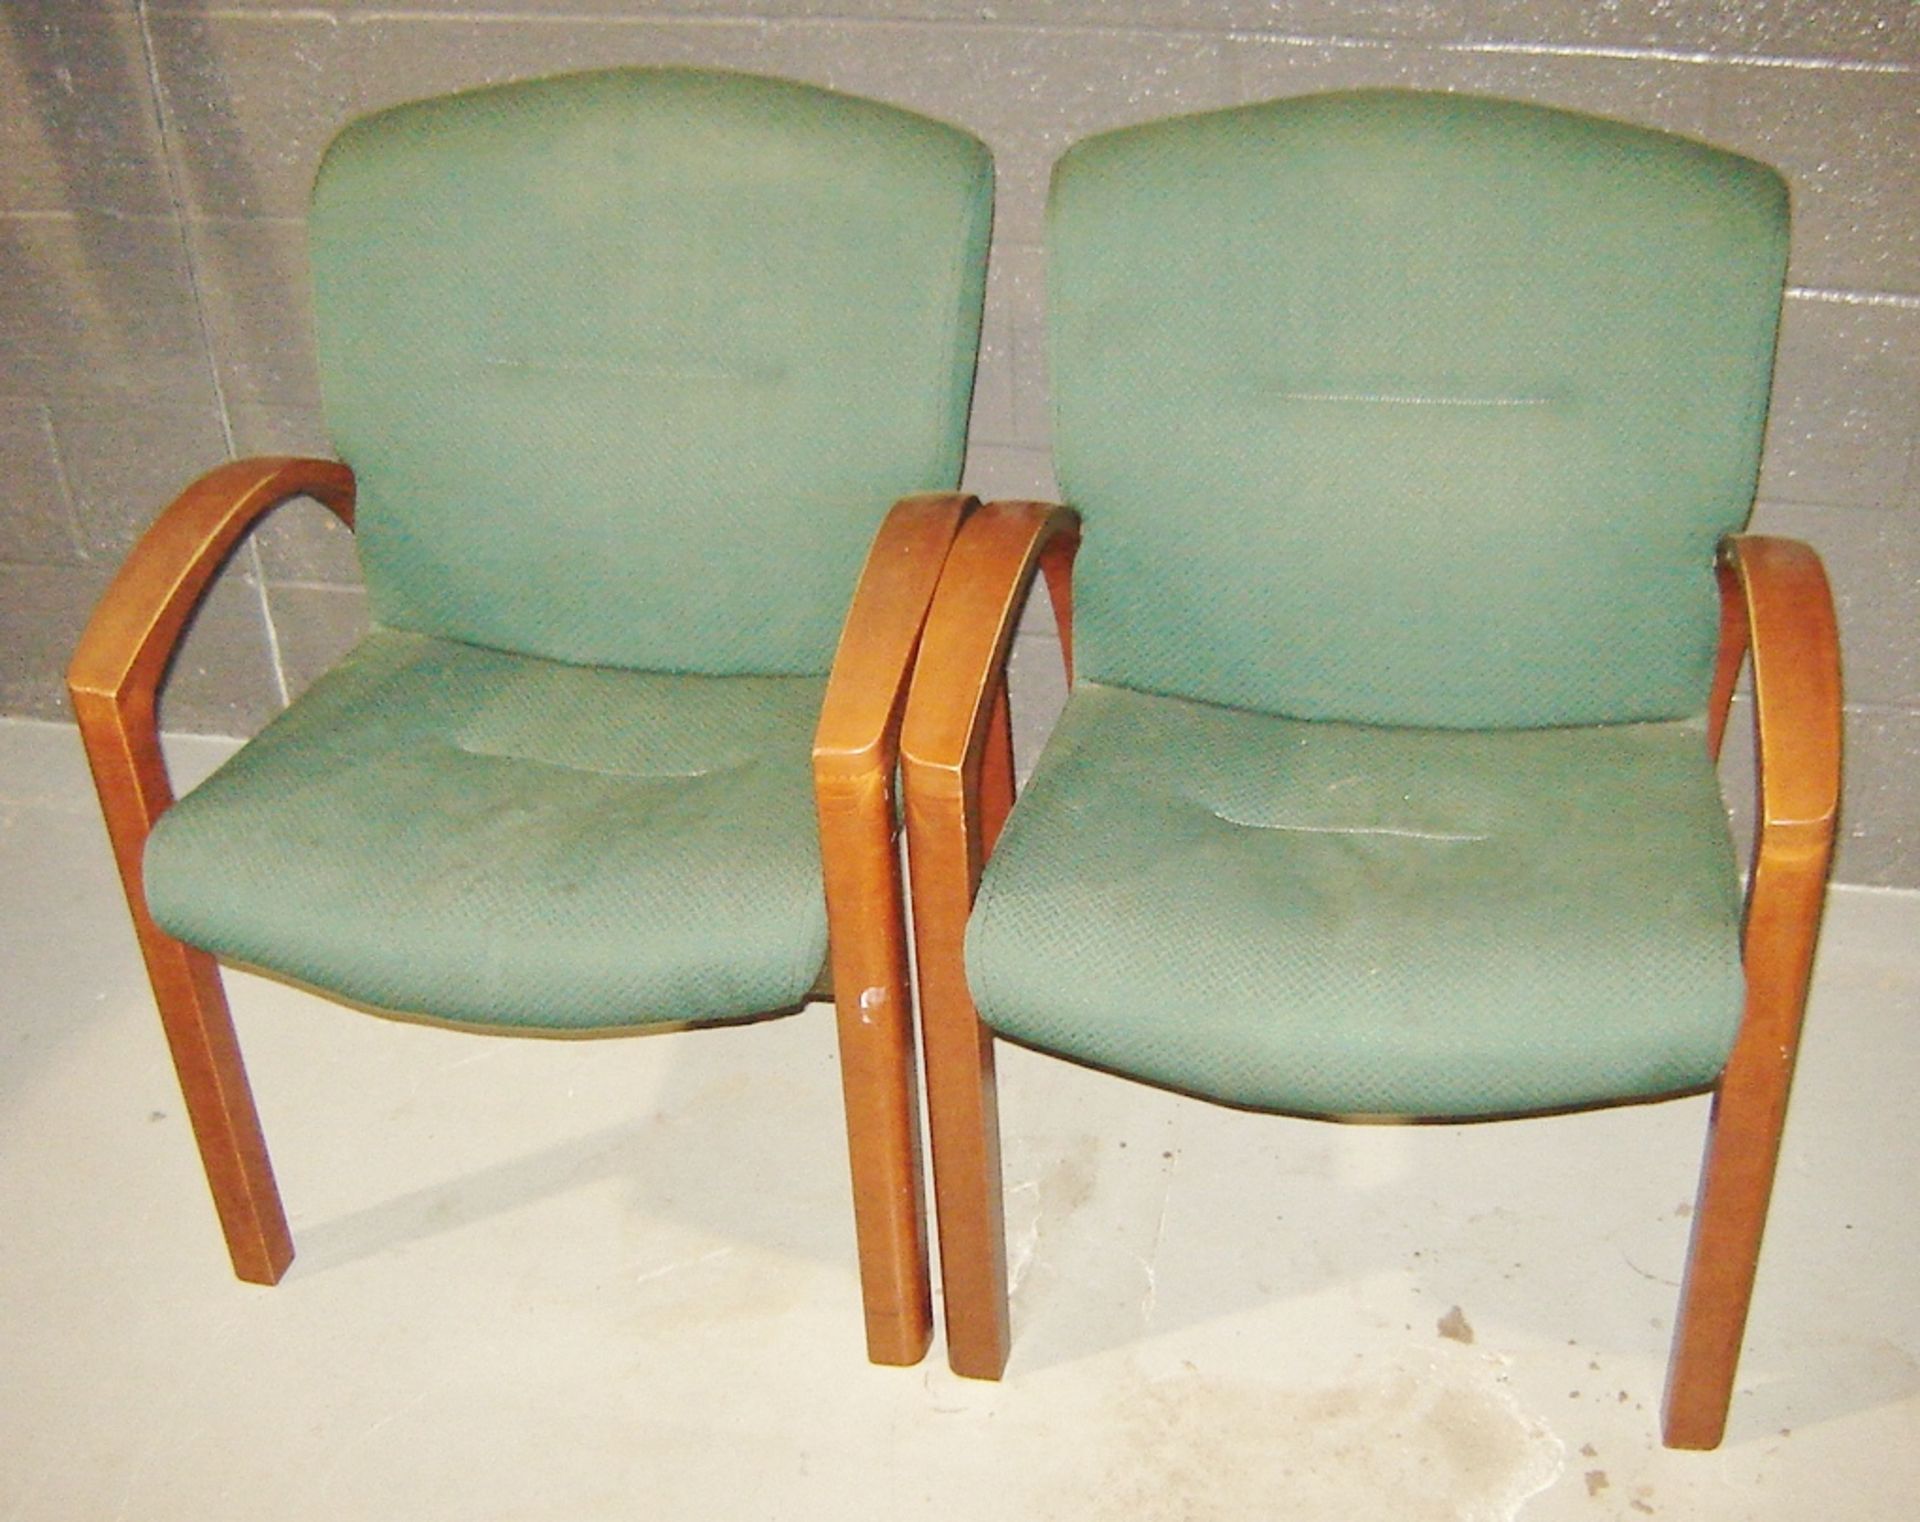 Upholstered & Wooden Frame Chairs - Image 2 of 3